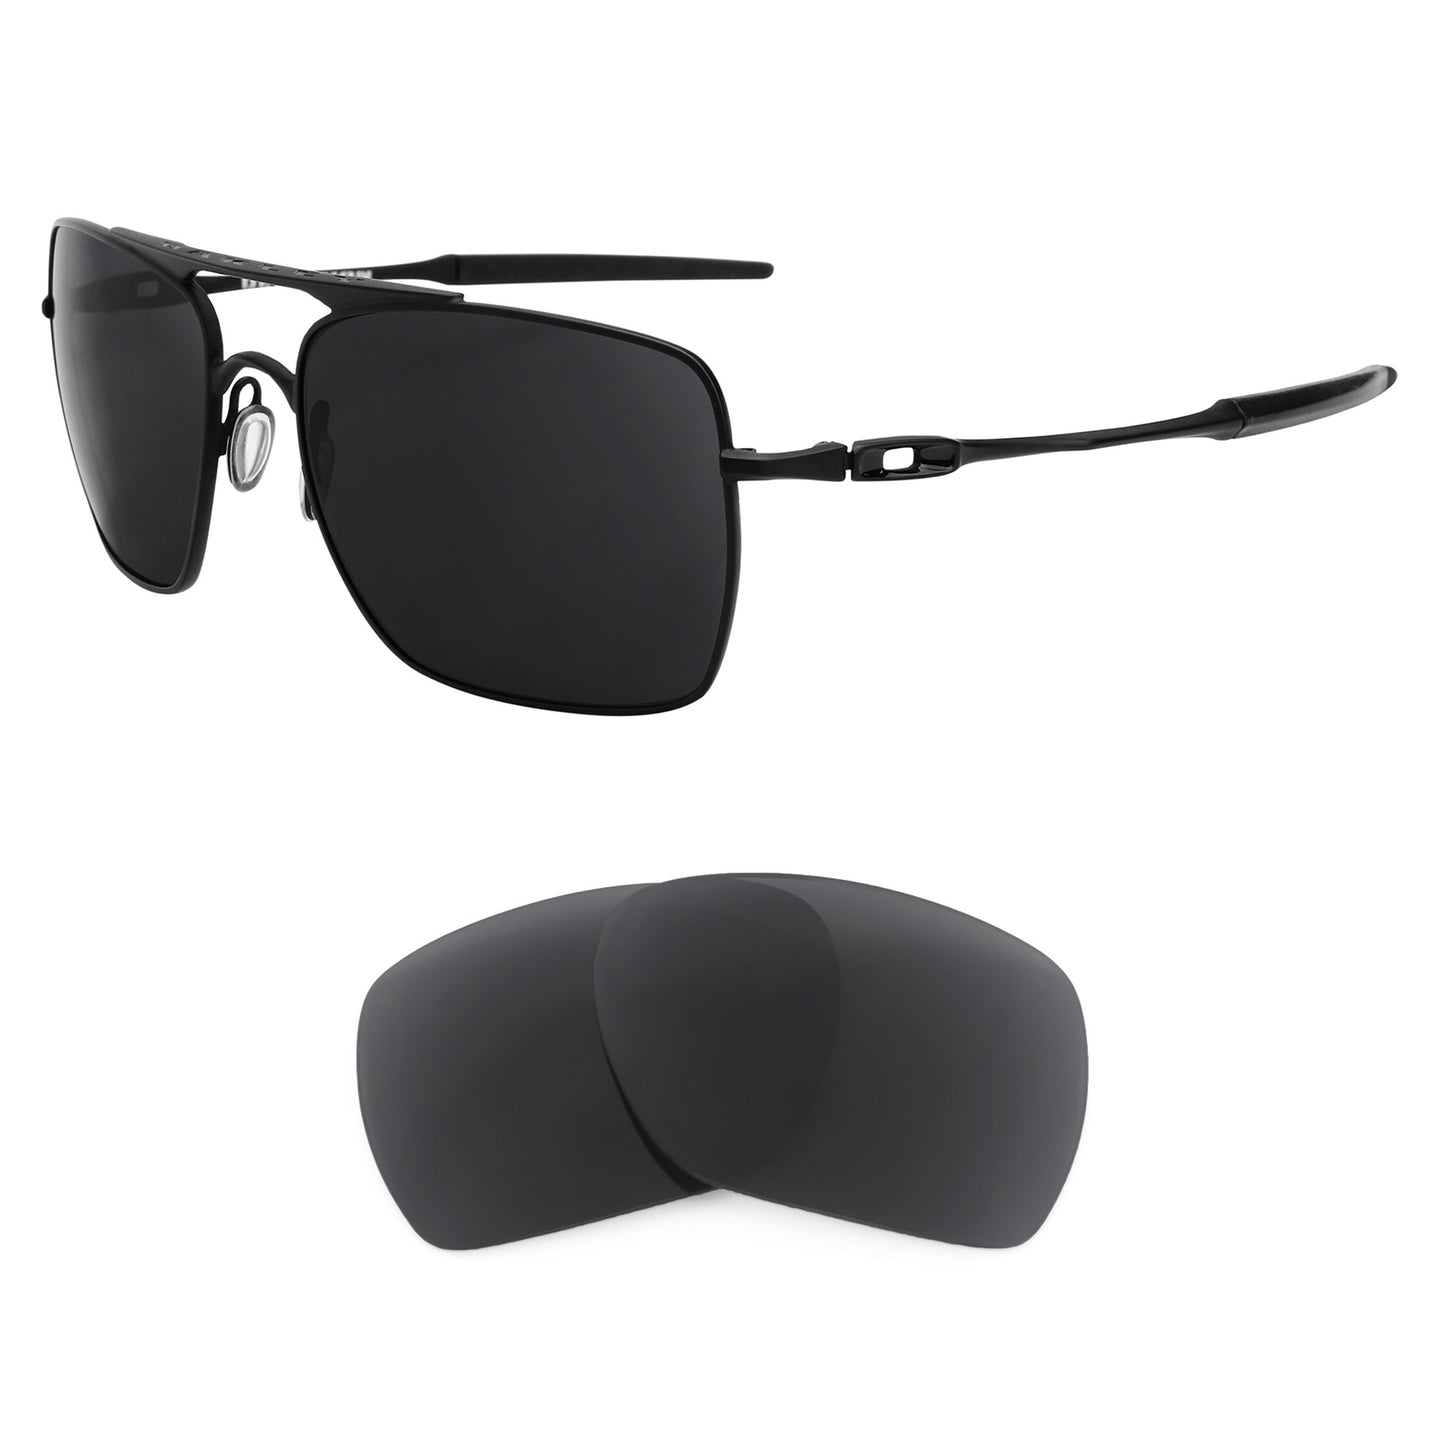 Oakley Deviation sunglasses with replacement lenses